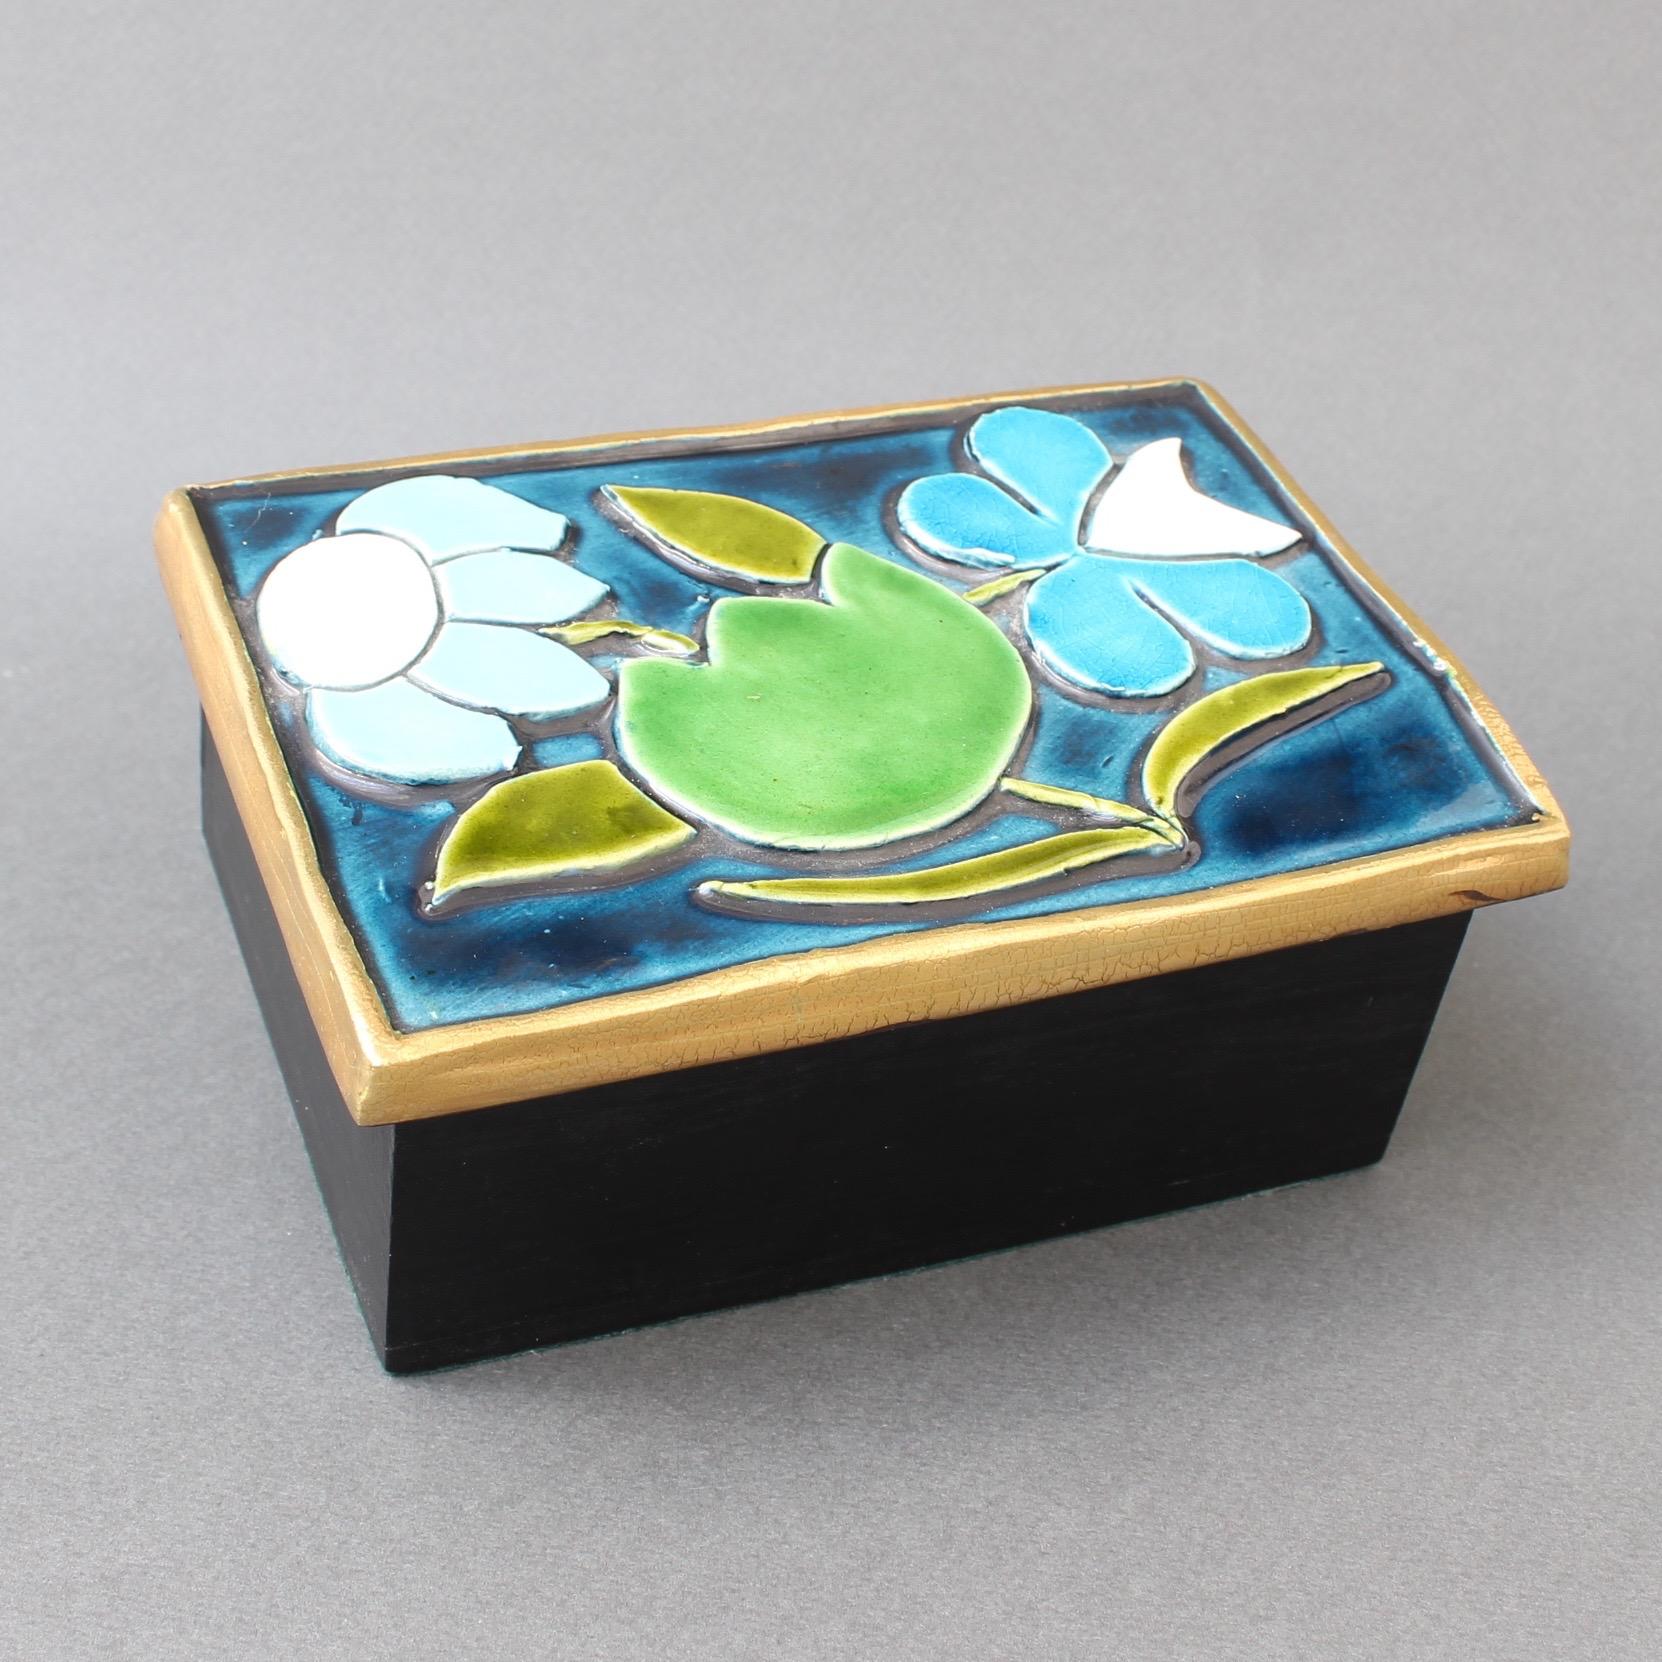 Jewellery box with decorative ceramic lid by François Lembo 'circa 1960s'. Art Deco style raised floral motif with blue, green and white over a stunning blue base lid. The decorative surround is in Lembo's trademark gold crackle. The lid tops a